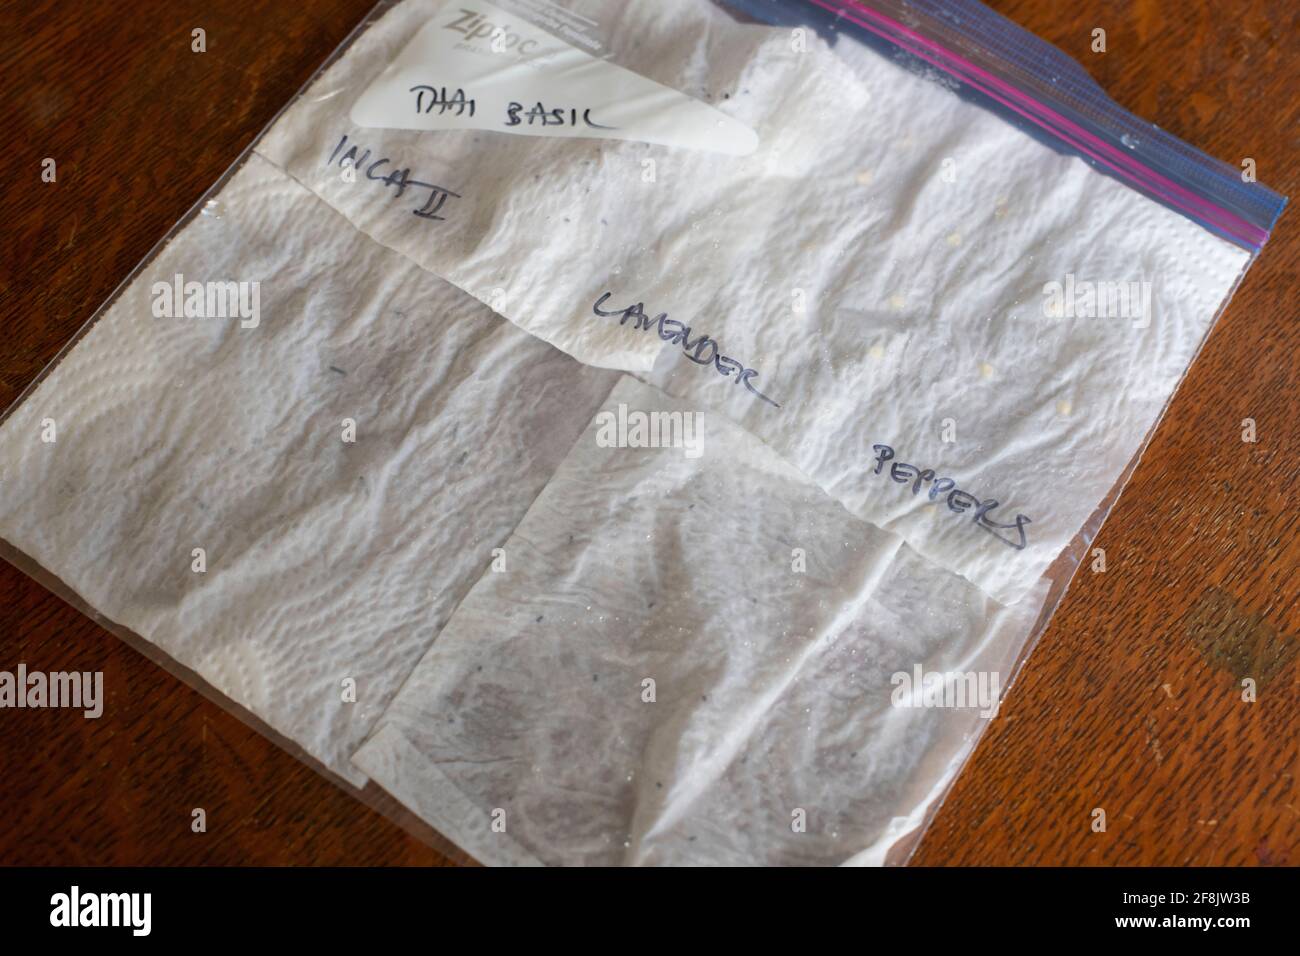 https://c8.alamy.com/comp/2F8JW3B/starting-seeds-in-a-ziplock-bag-to-be-germinated-in-an-instant-pot-april-2021-2F8JW3B.jpg